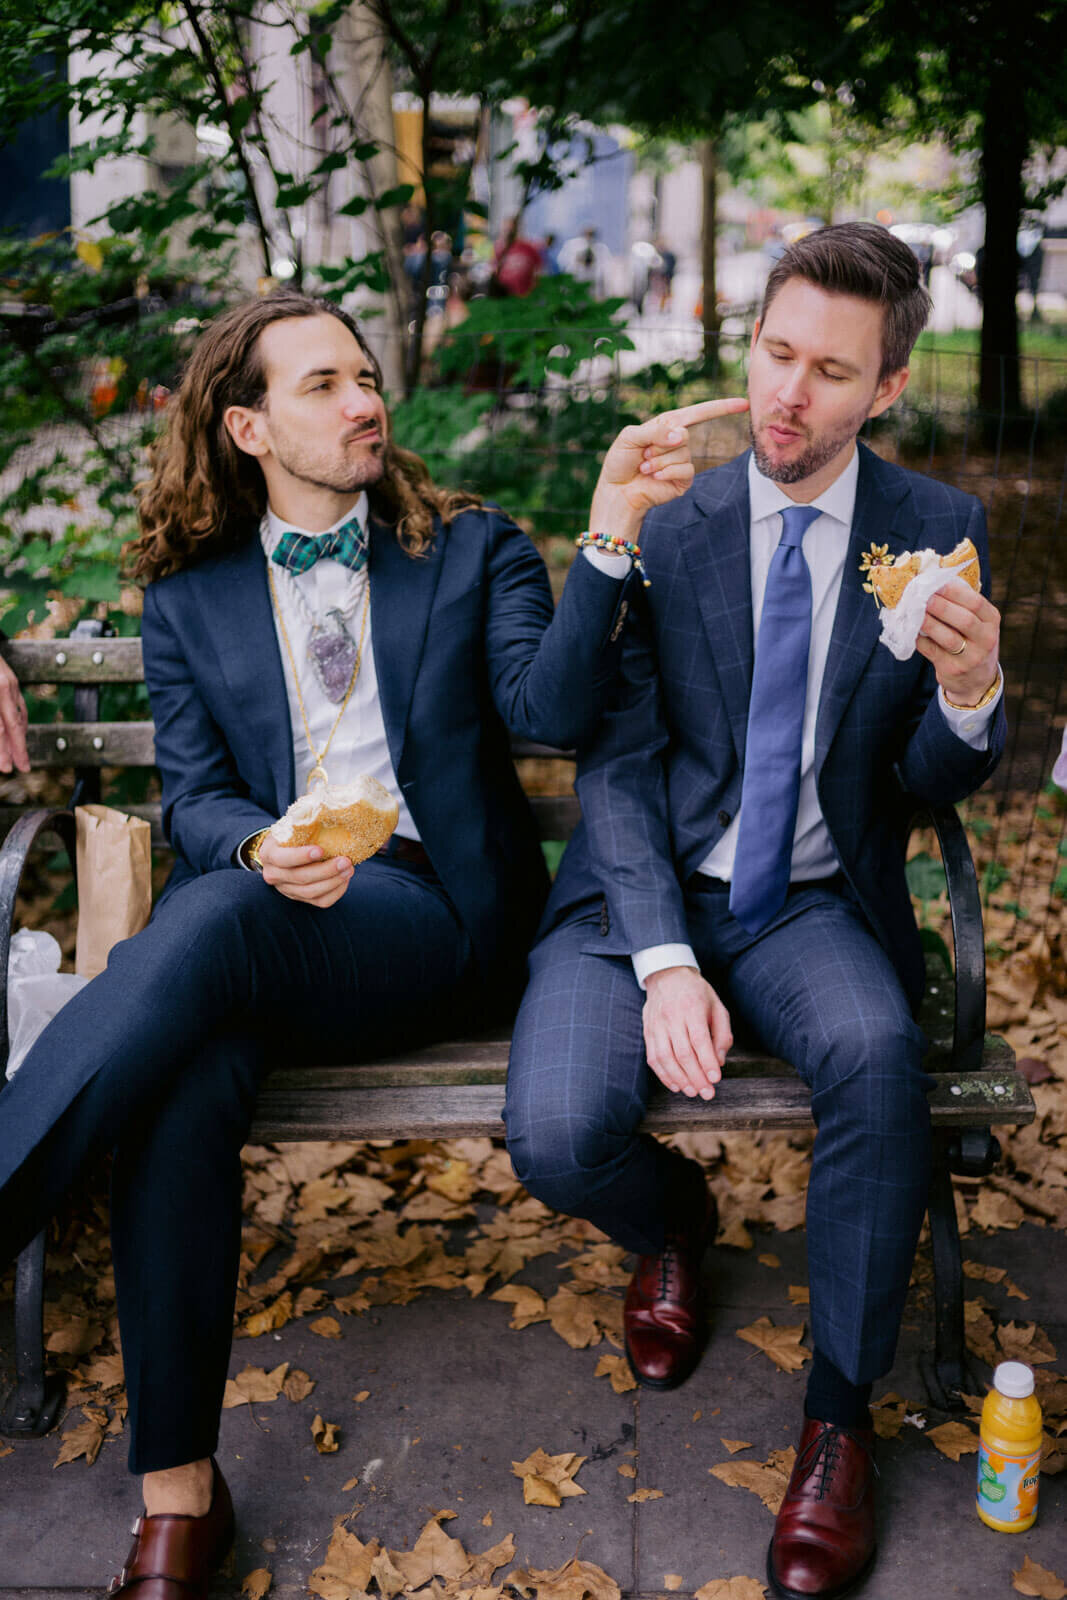 The two grooms are eating burger while sitting on a park bench after the ceremony. NYC City Hall Elopement Image by Jenny Fu Studio